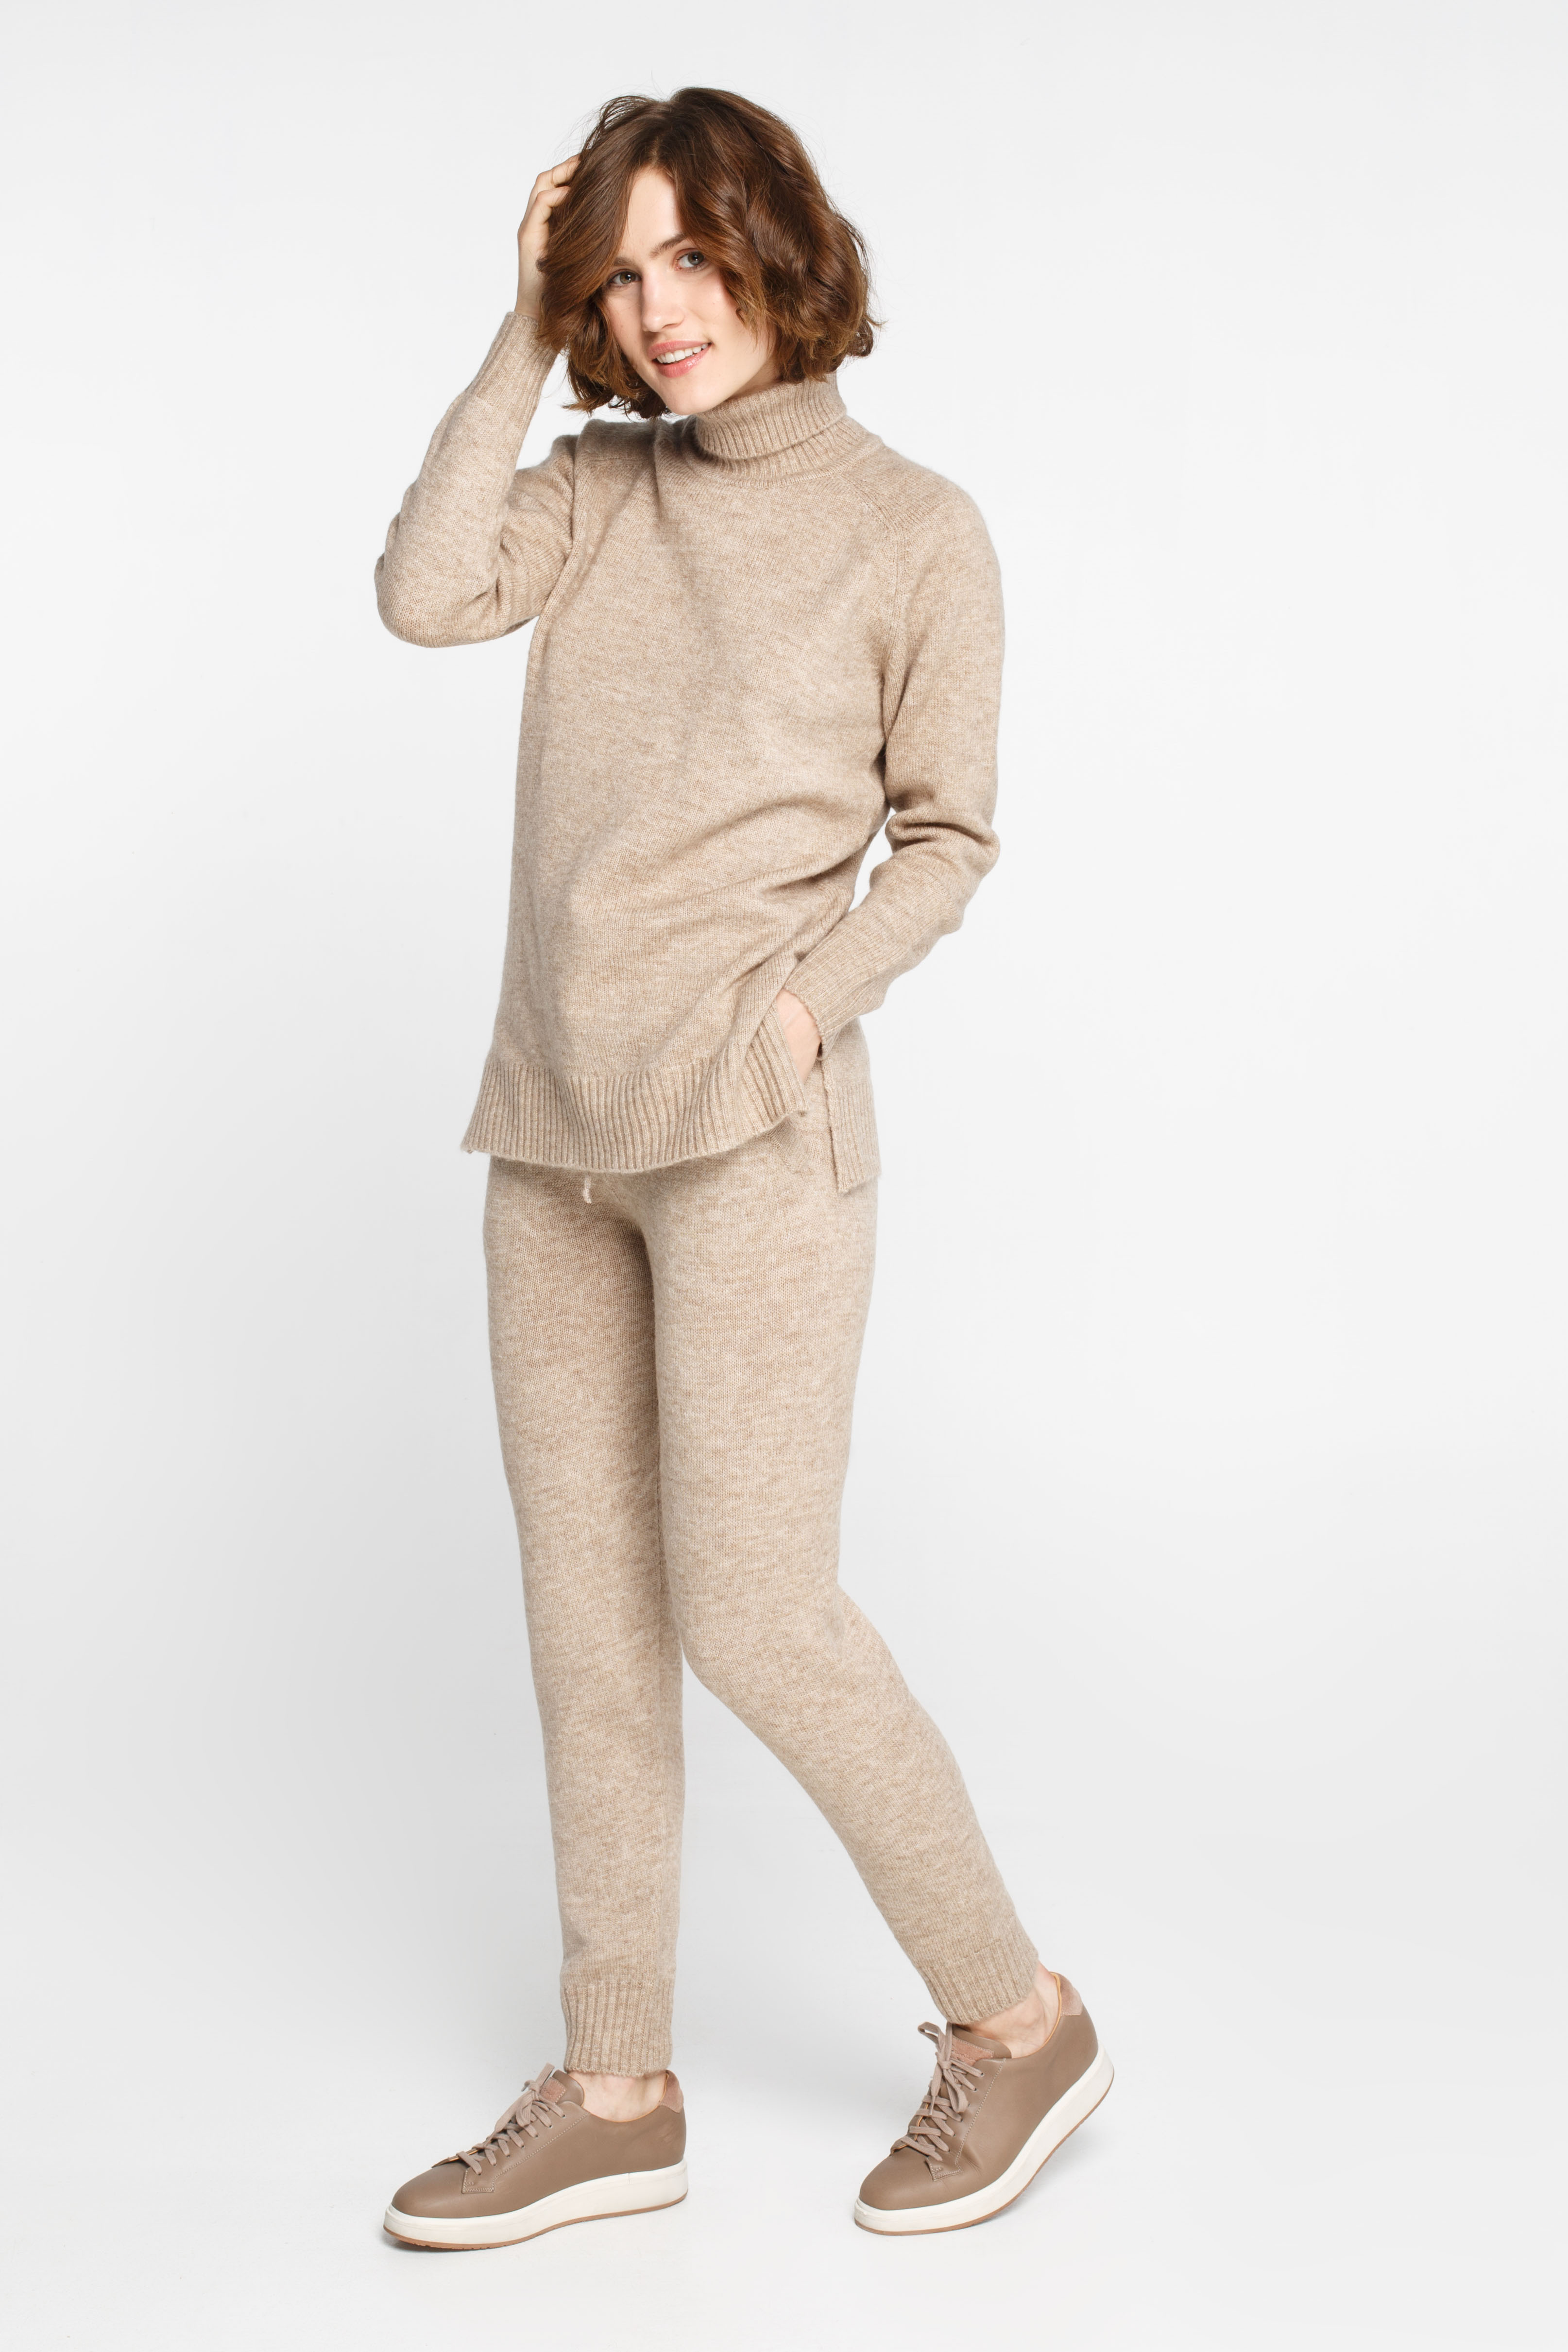 Knit beige jogging pants with wool, photo 4